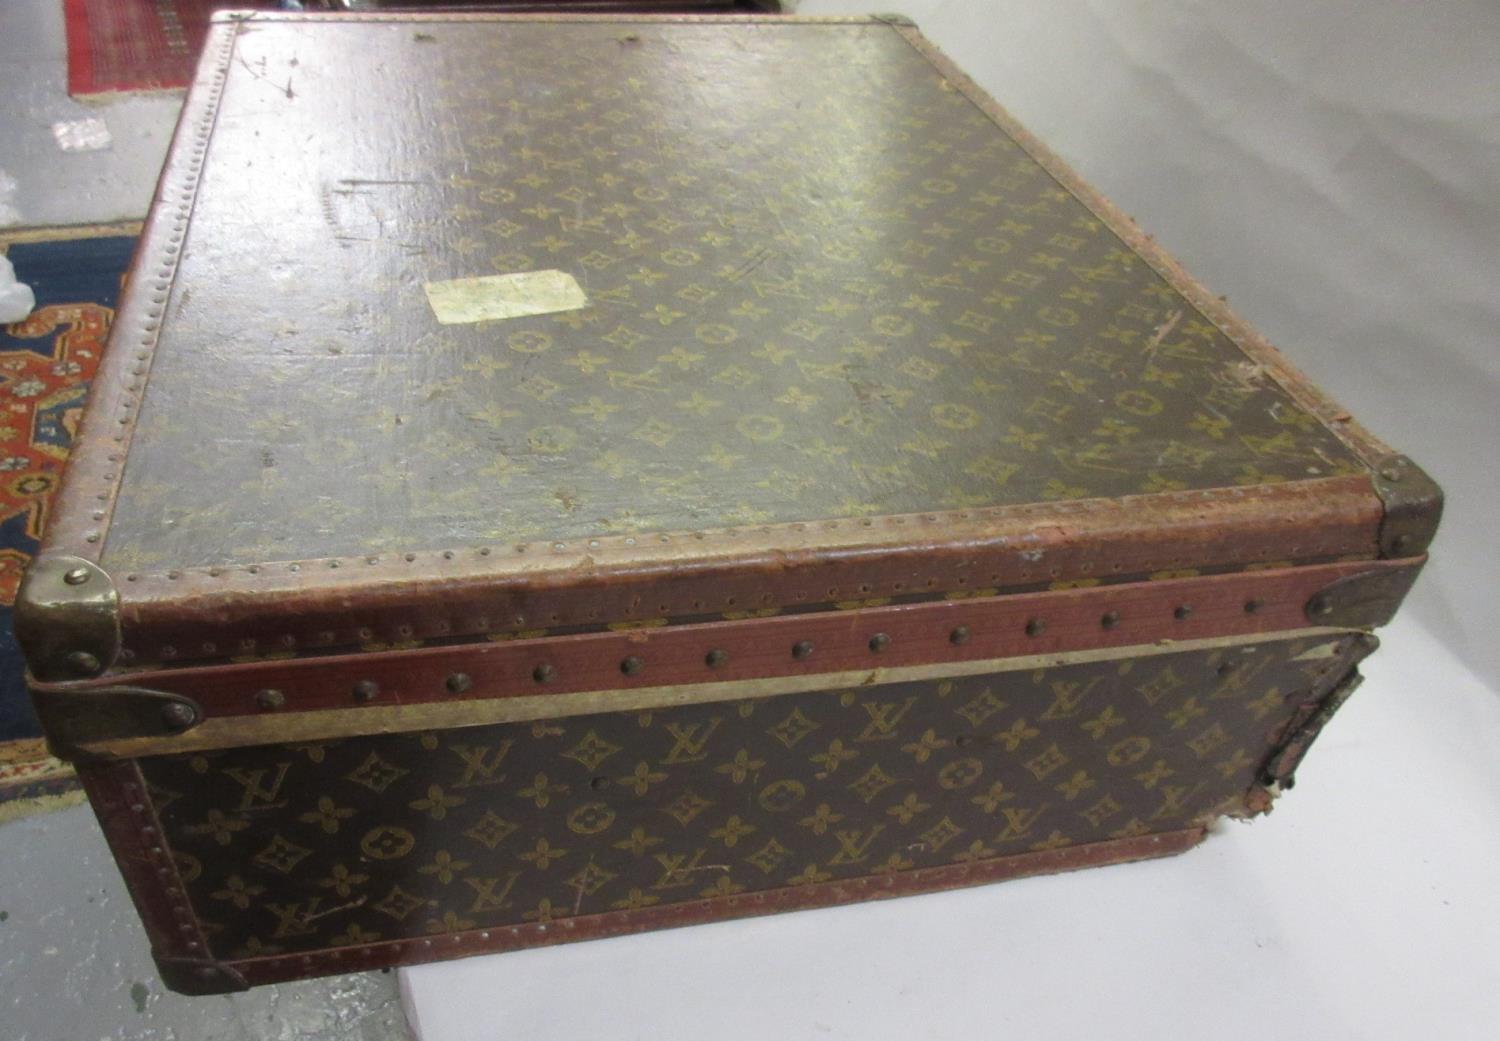 Louis Vuitton, early 20th Century suitcase decorated with the all-over monogram design, the original - Image 2 of 4